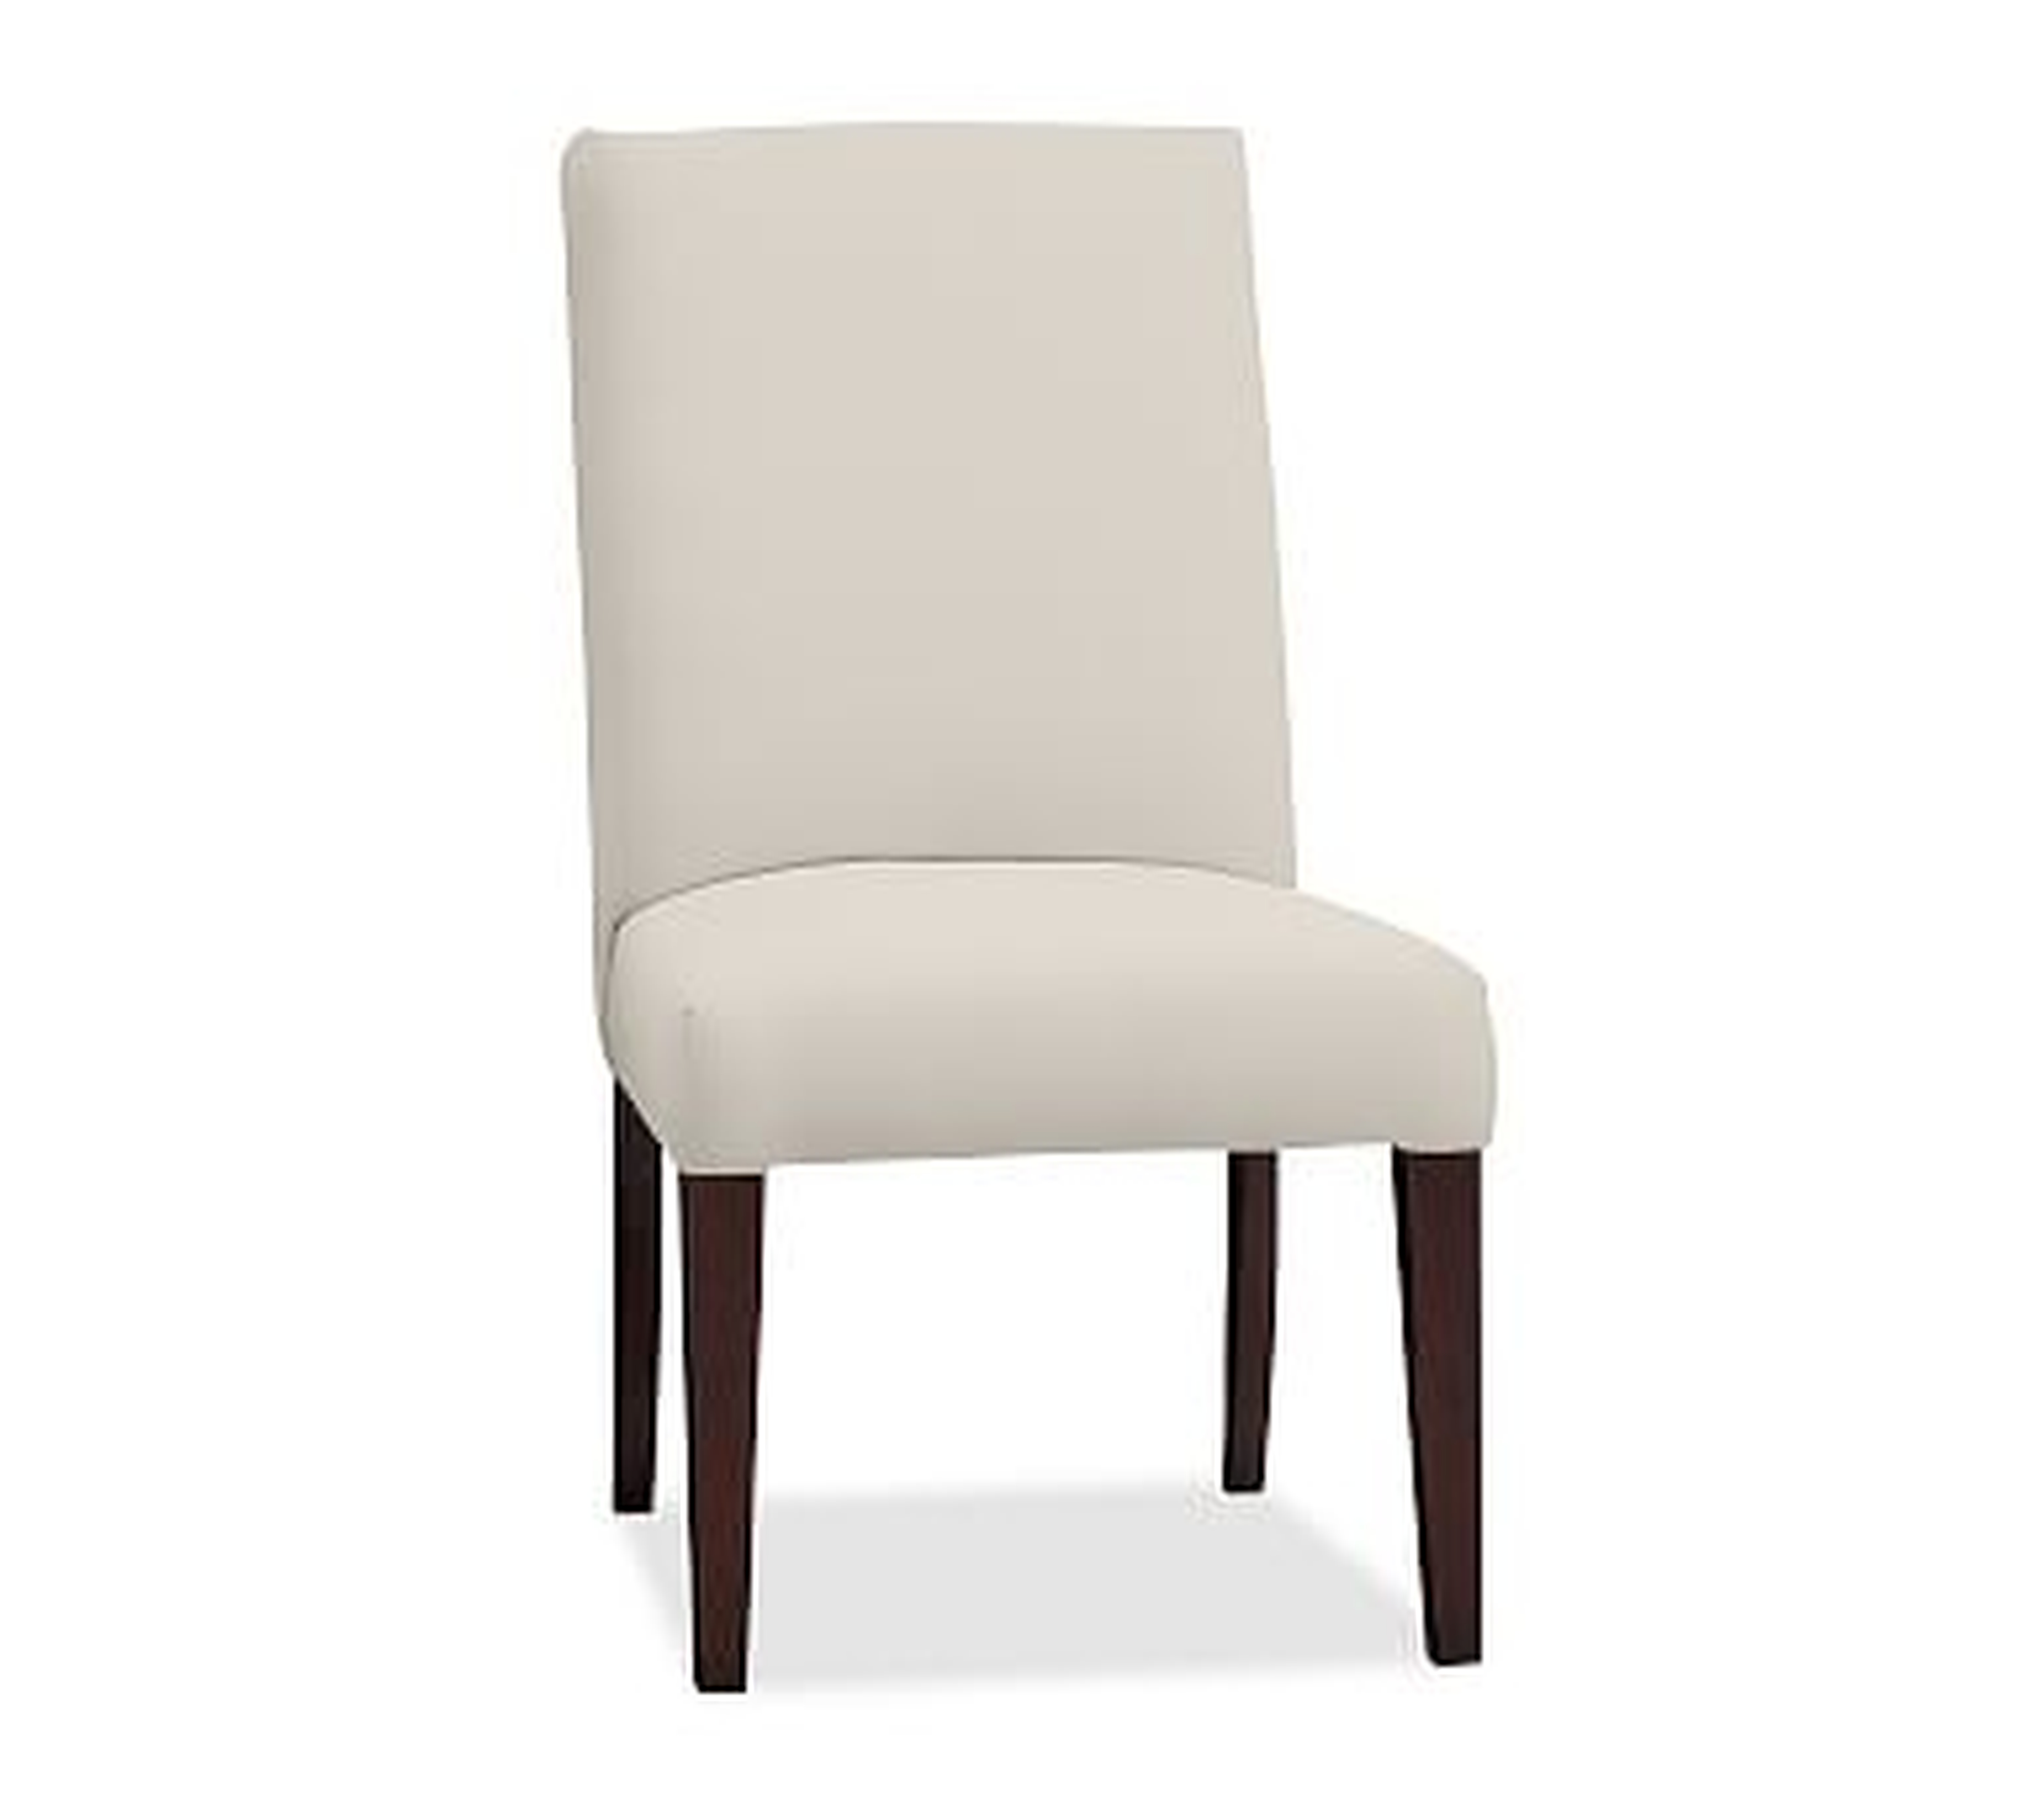 PB Comfort Square Upholstered Dining Side Chair, Twill Cream - espresso - Pottery Barn